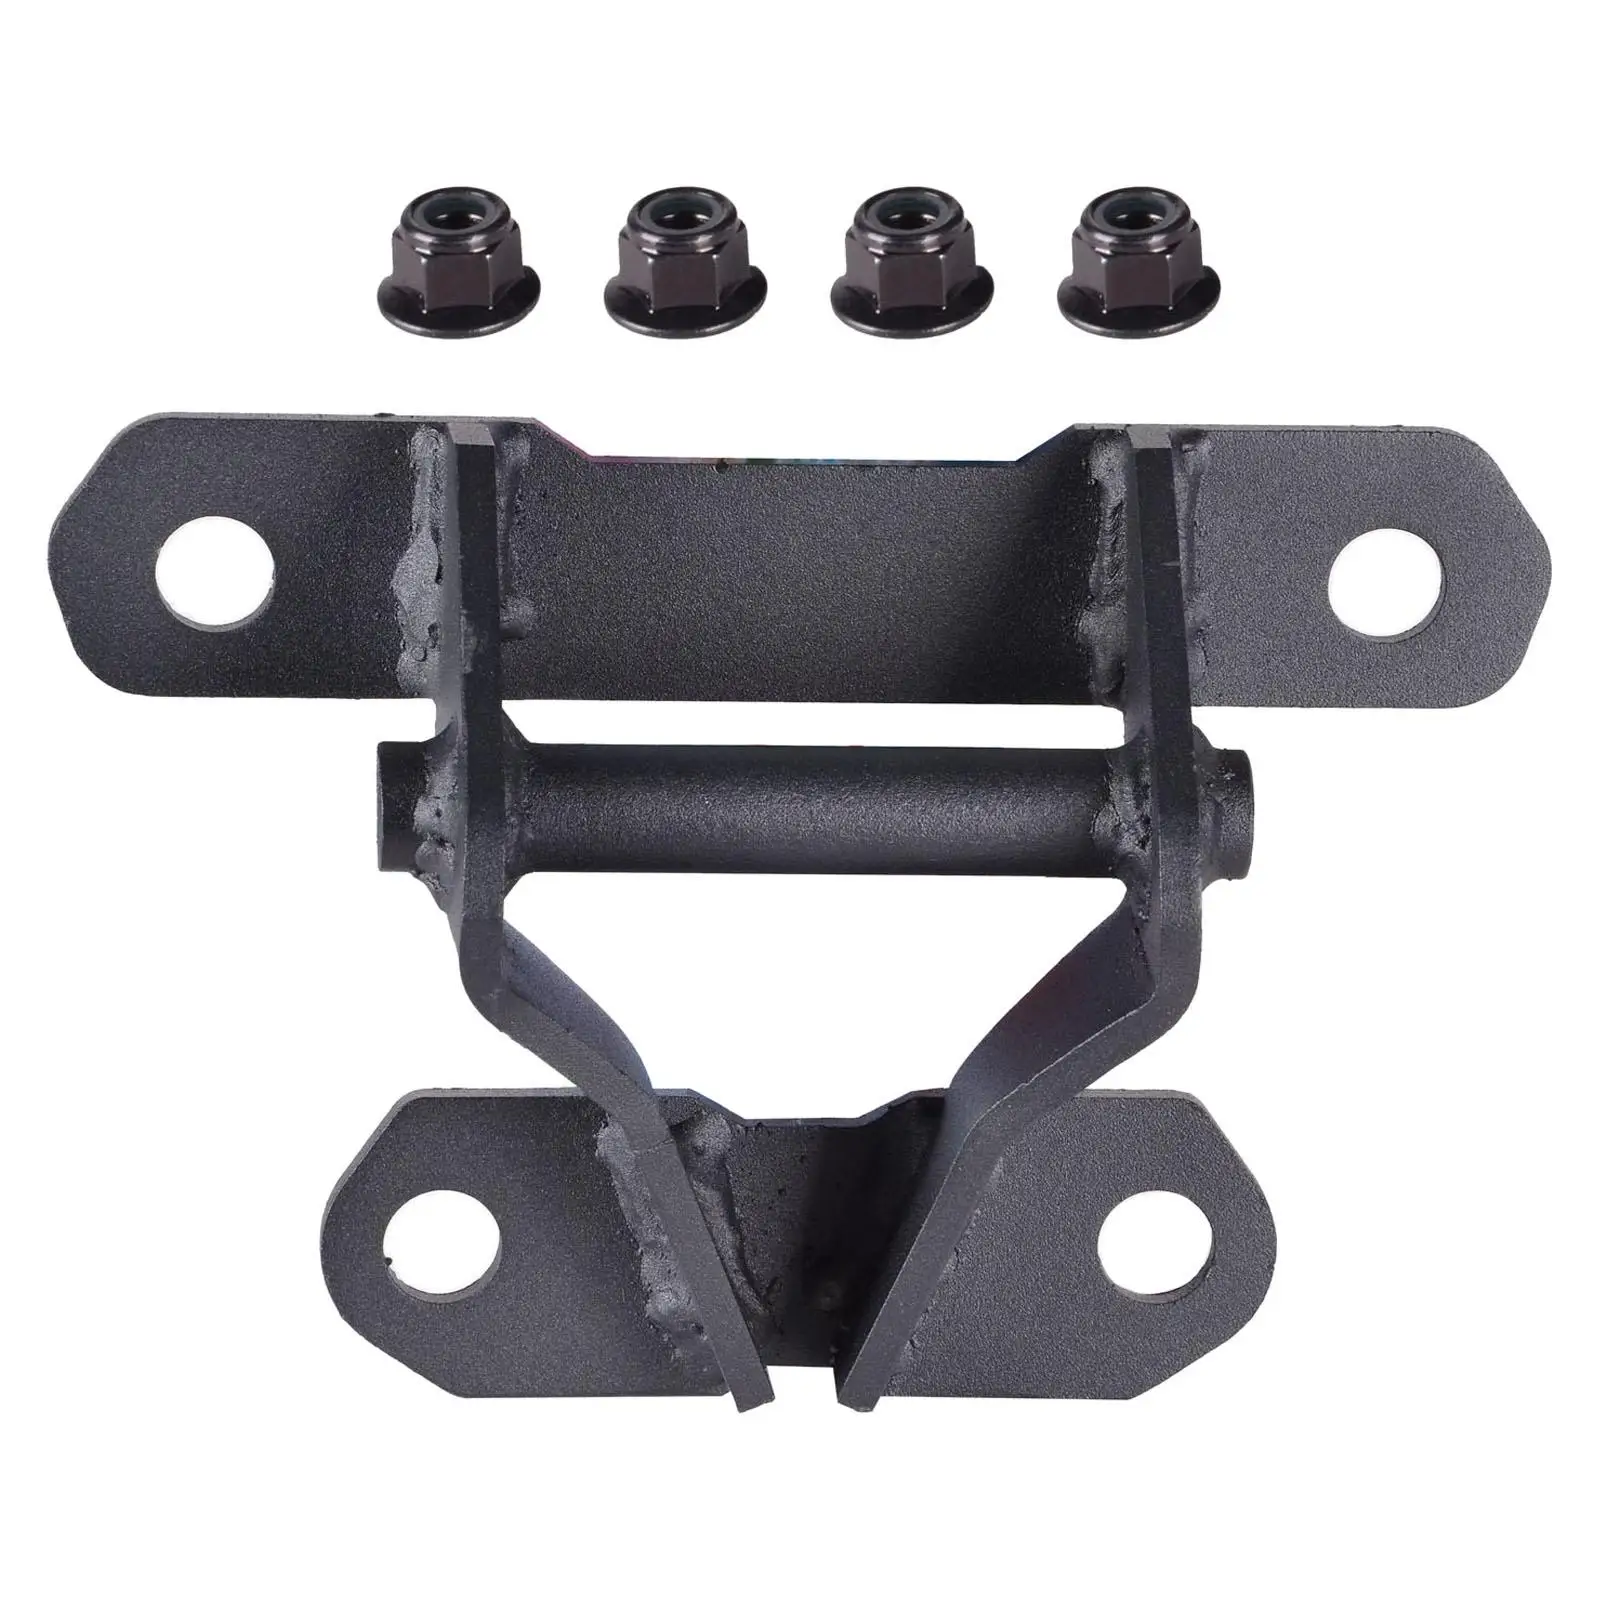 UTV Rear Pull Plate Tow Hook Fits for x3 / x32021 715004450